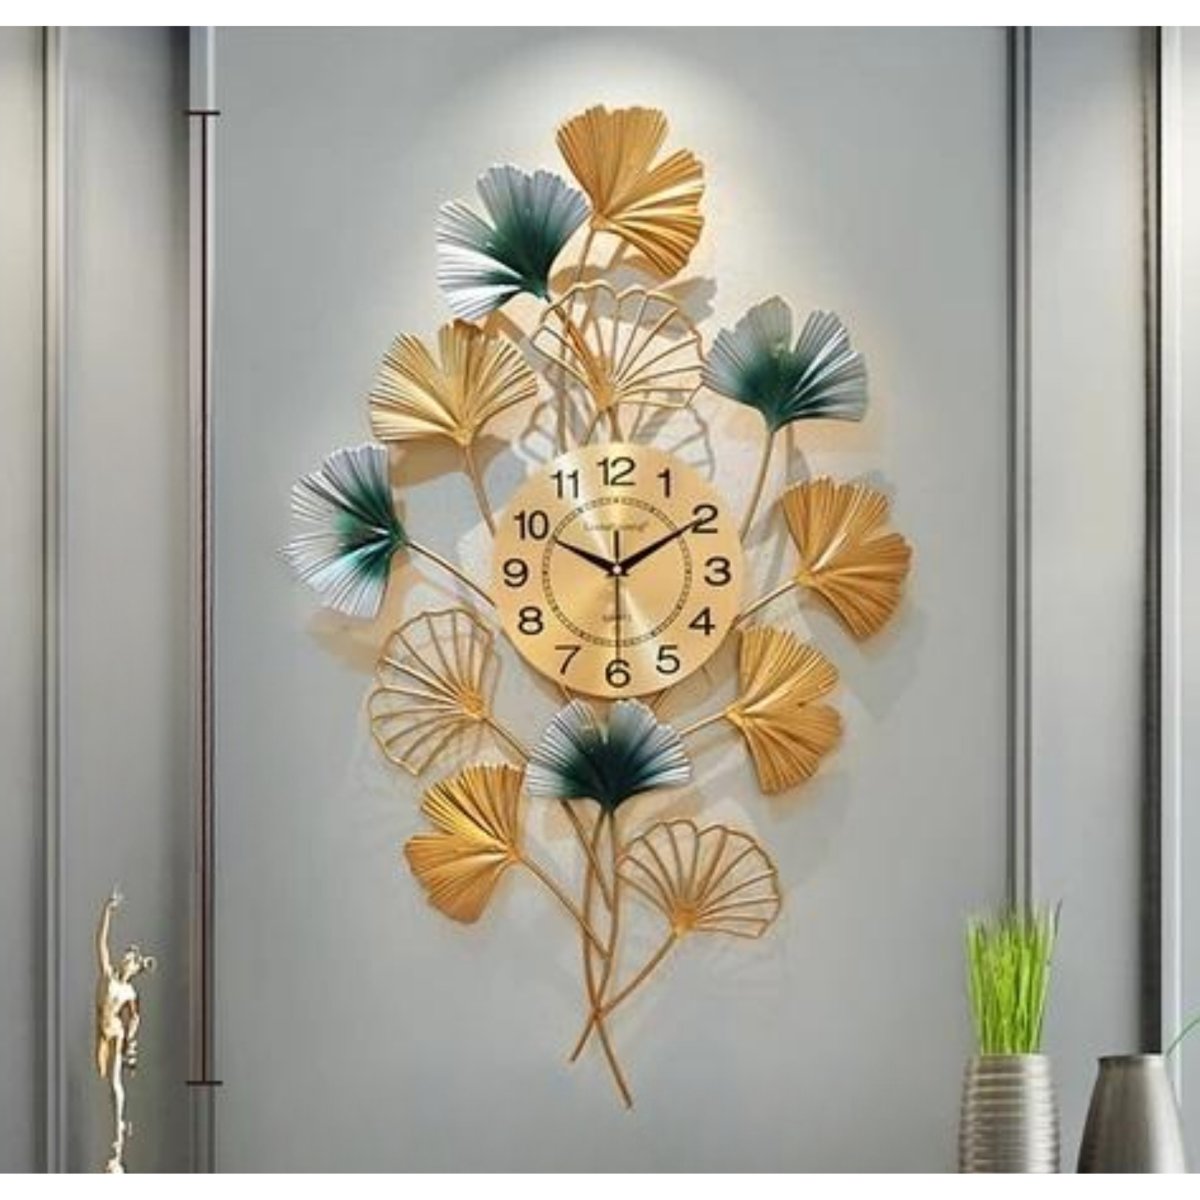 Metalkart Special Vertical Gingko Leaf Wall Clock (24 x 36 Inches)